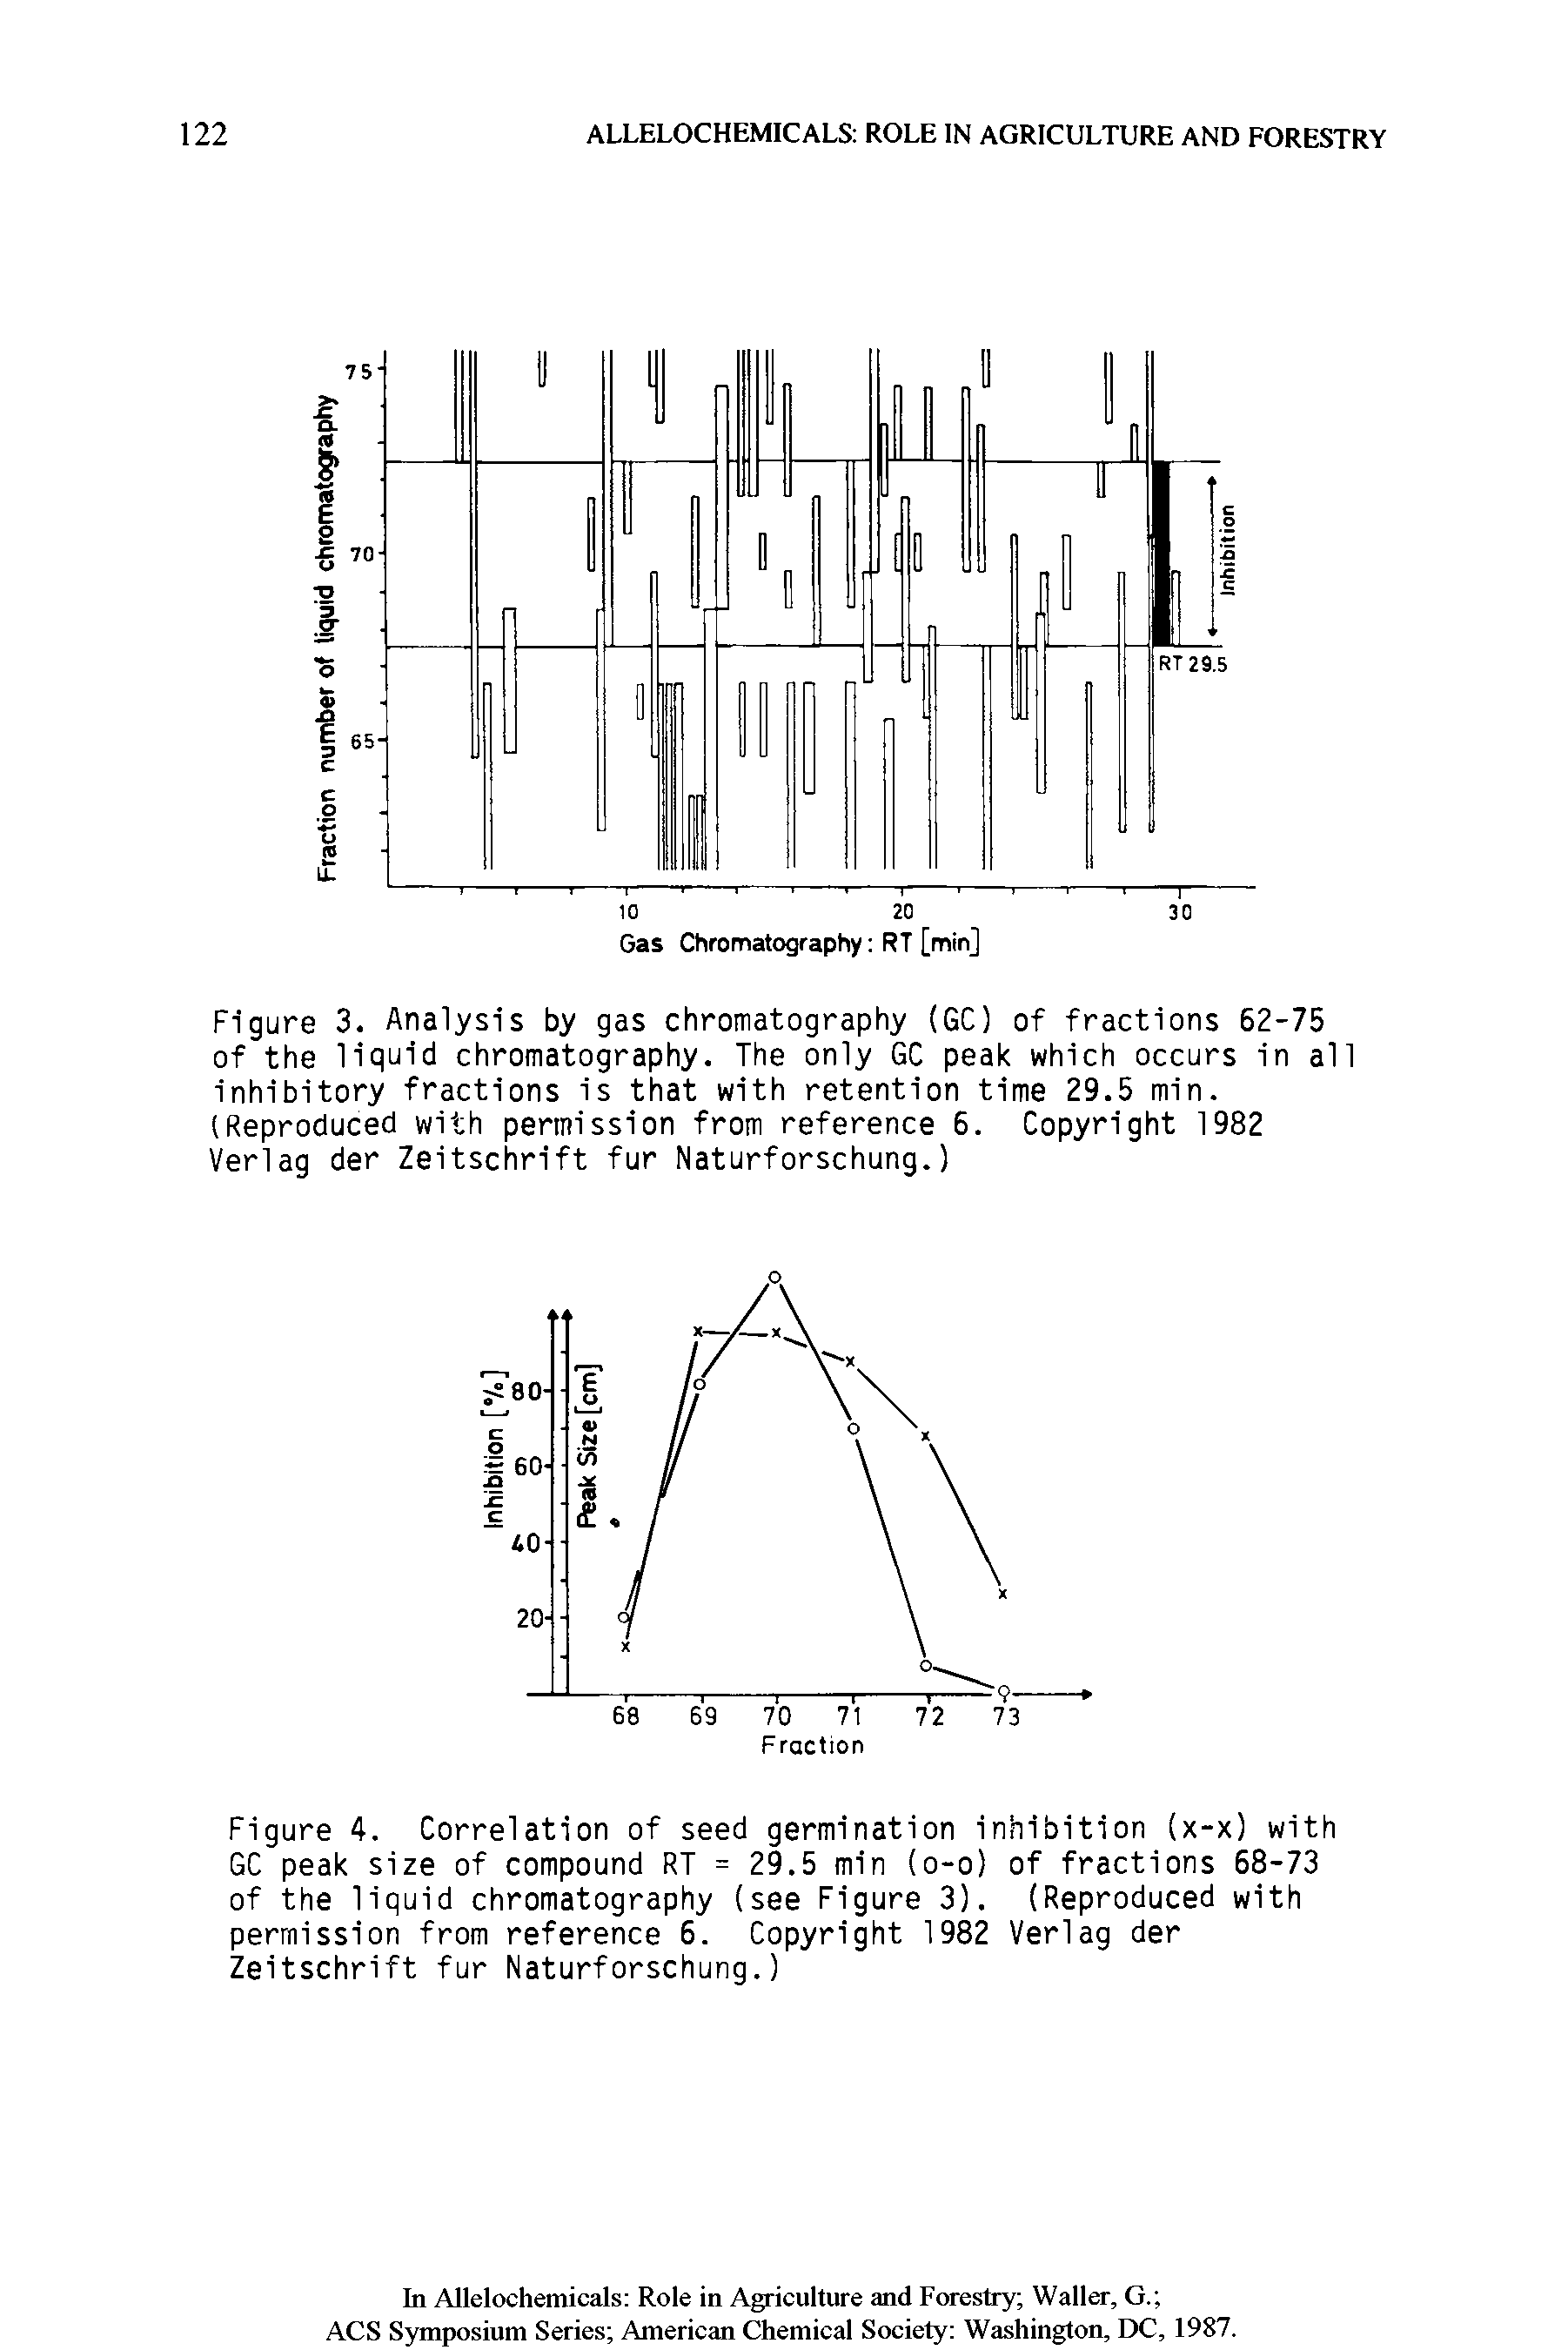 Figure 4. Correlation of seed germination inhibition (x-x) with GC peak size of compound RT = 29.5 min (o-o) of fractions 68-73 of the liquid chromatography (see Figure 3). (Reproduced with permission from reference 6. Copyright 1982 Verlag der Zeitschrift fur Naturforschung.)...